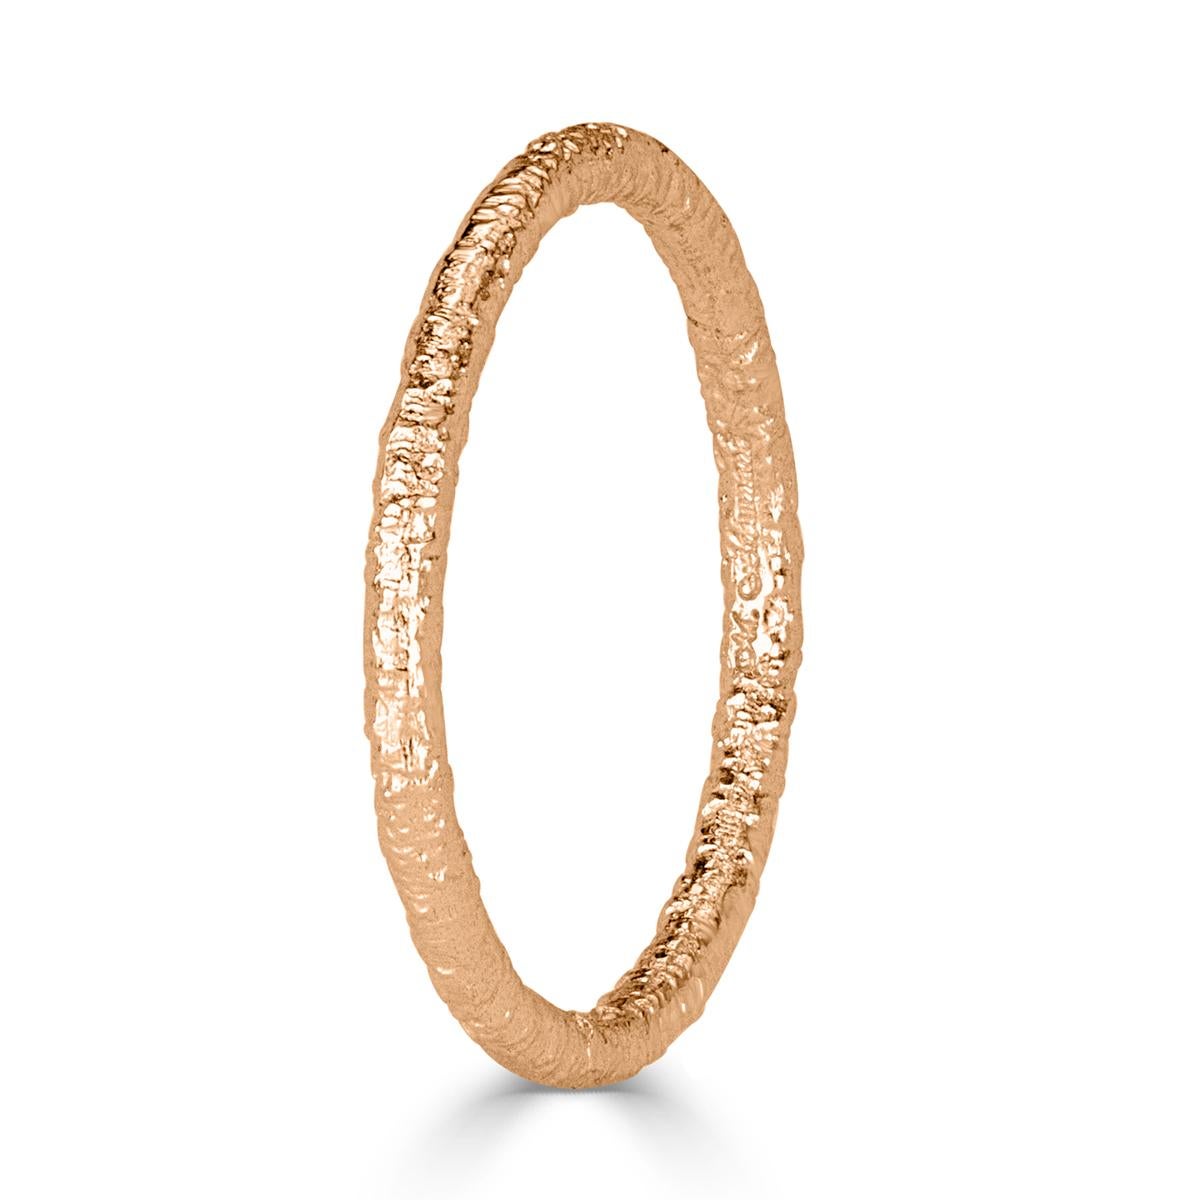 Custom created in 18k rose gold, this lovely band features a textured design which looks stunning in a stack or as a stand alone piece.
